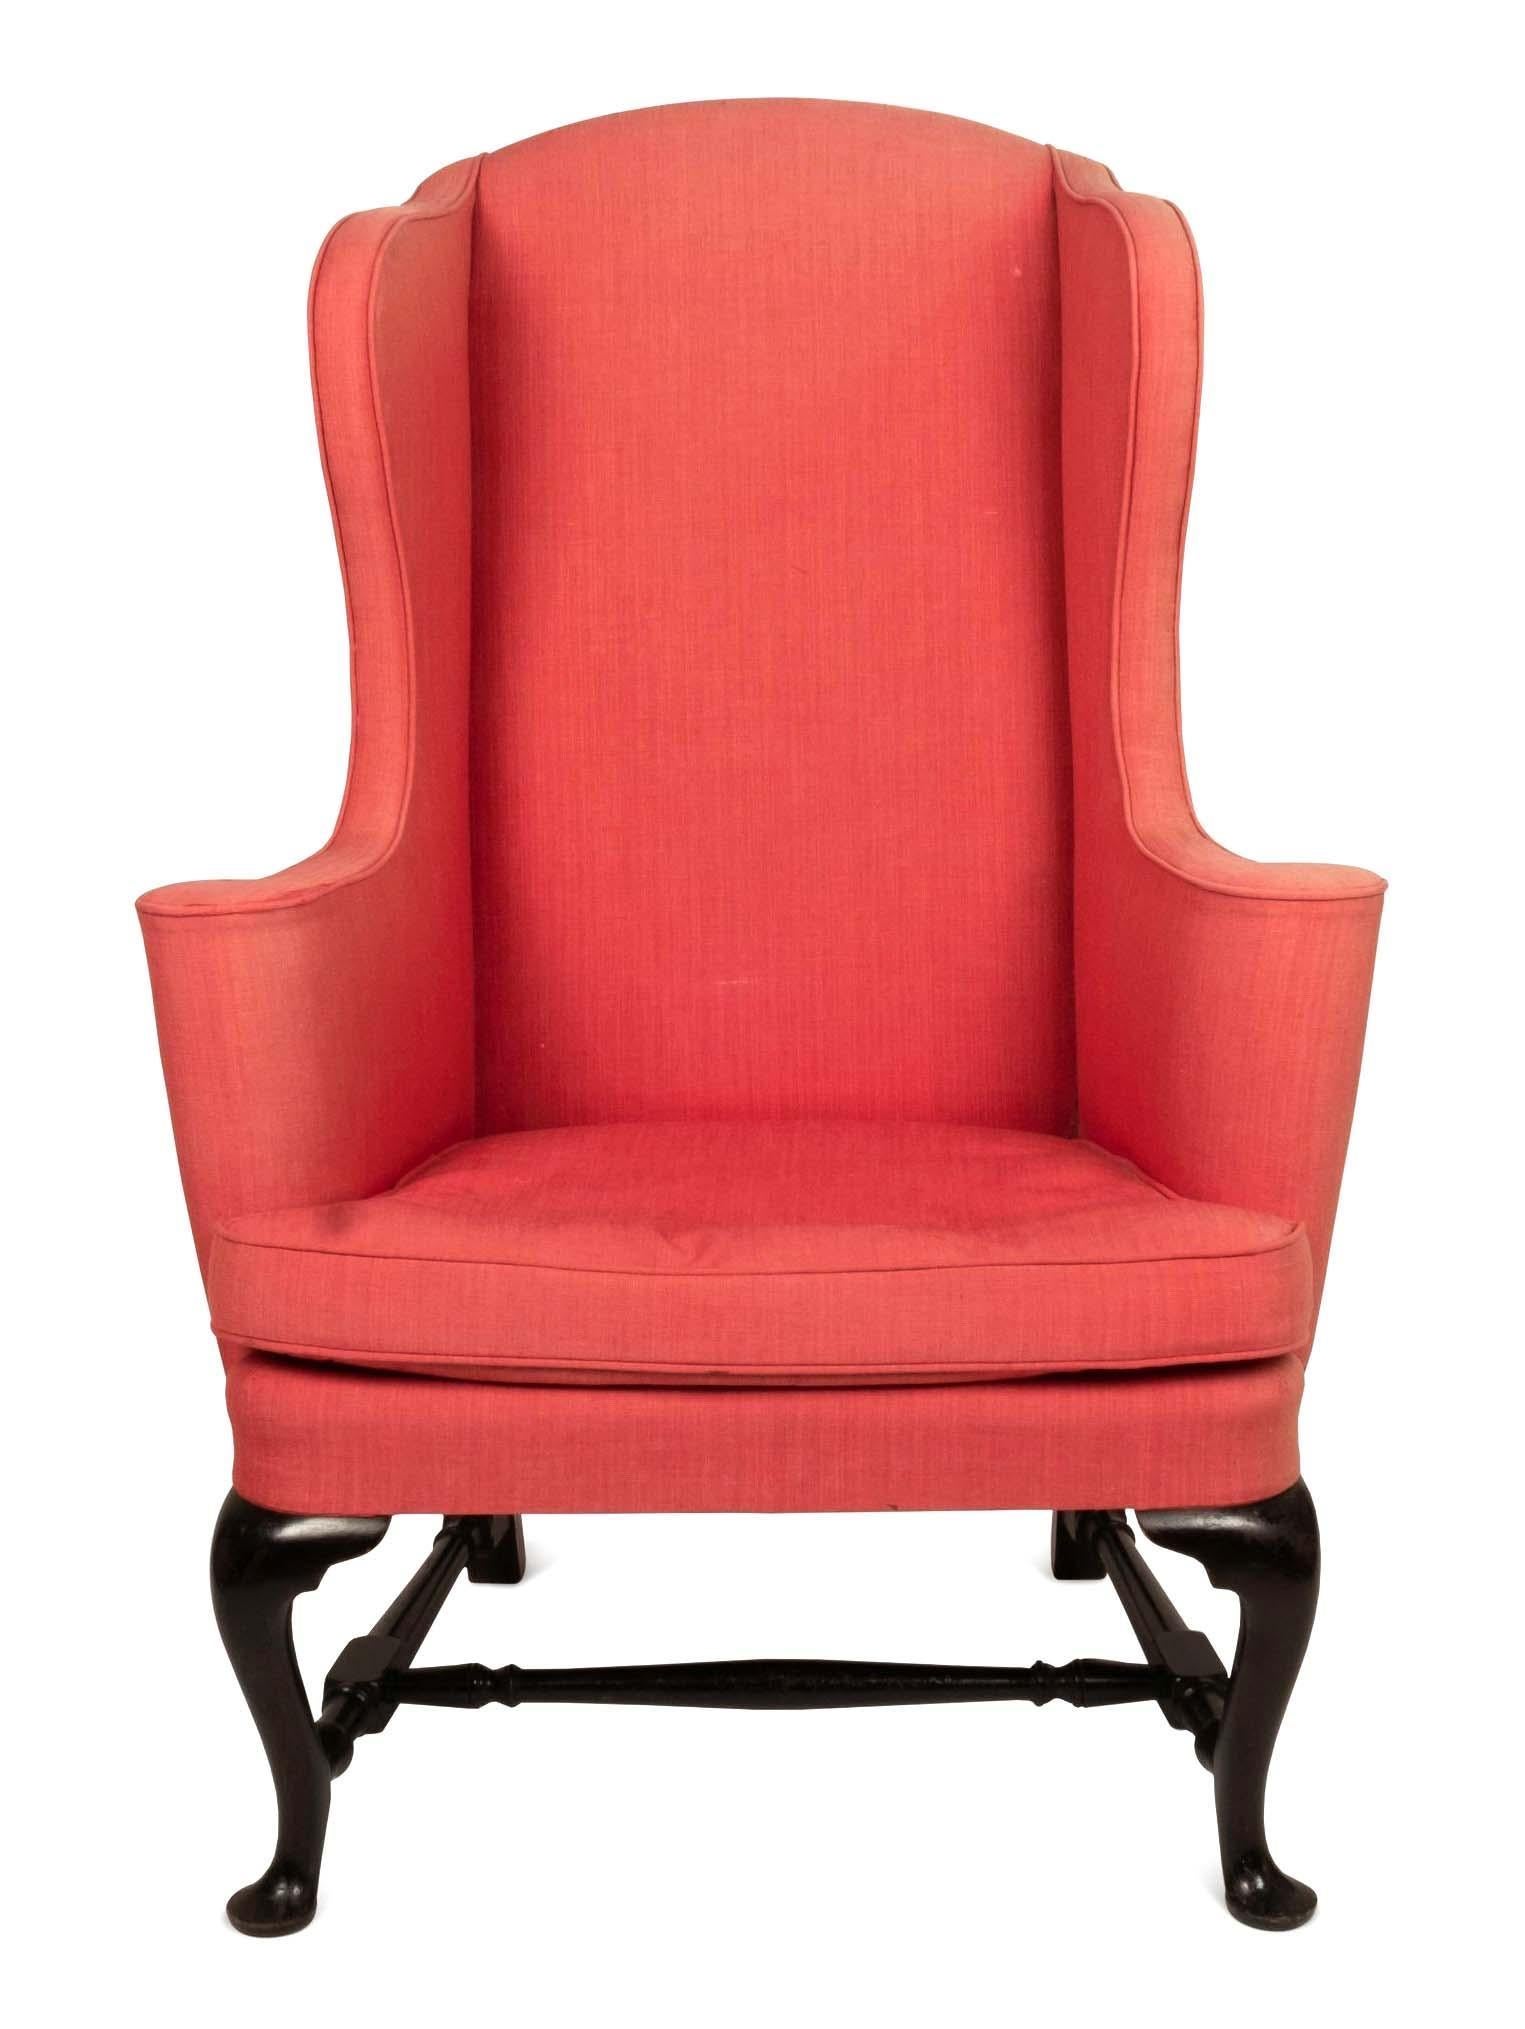 Antique Queen Anne Style Red Wingback Armchair In Good Condition For Sale In Sheridan, CO